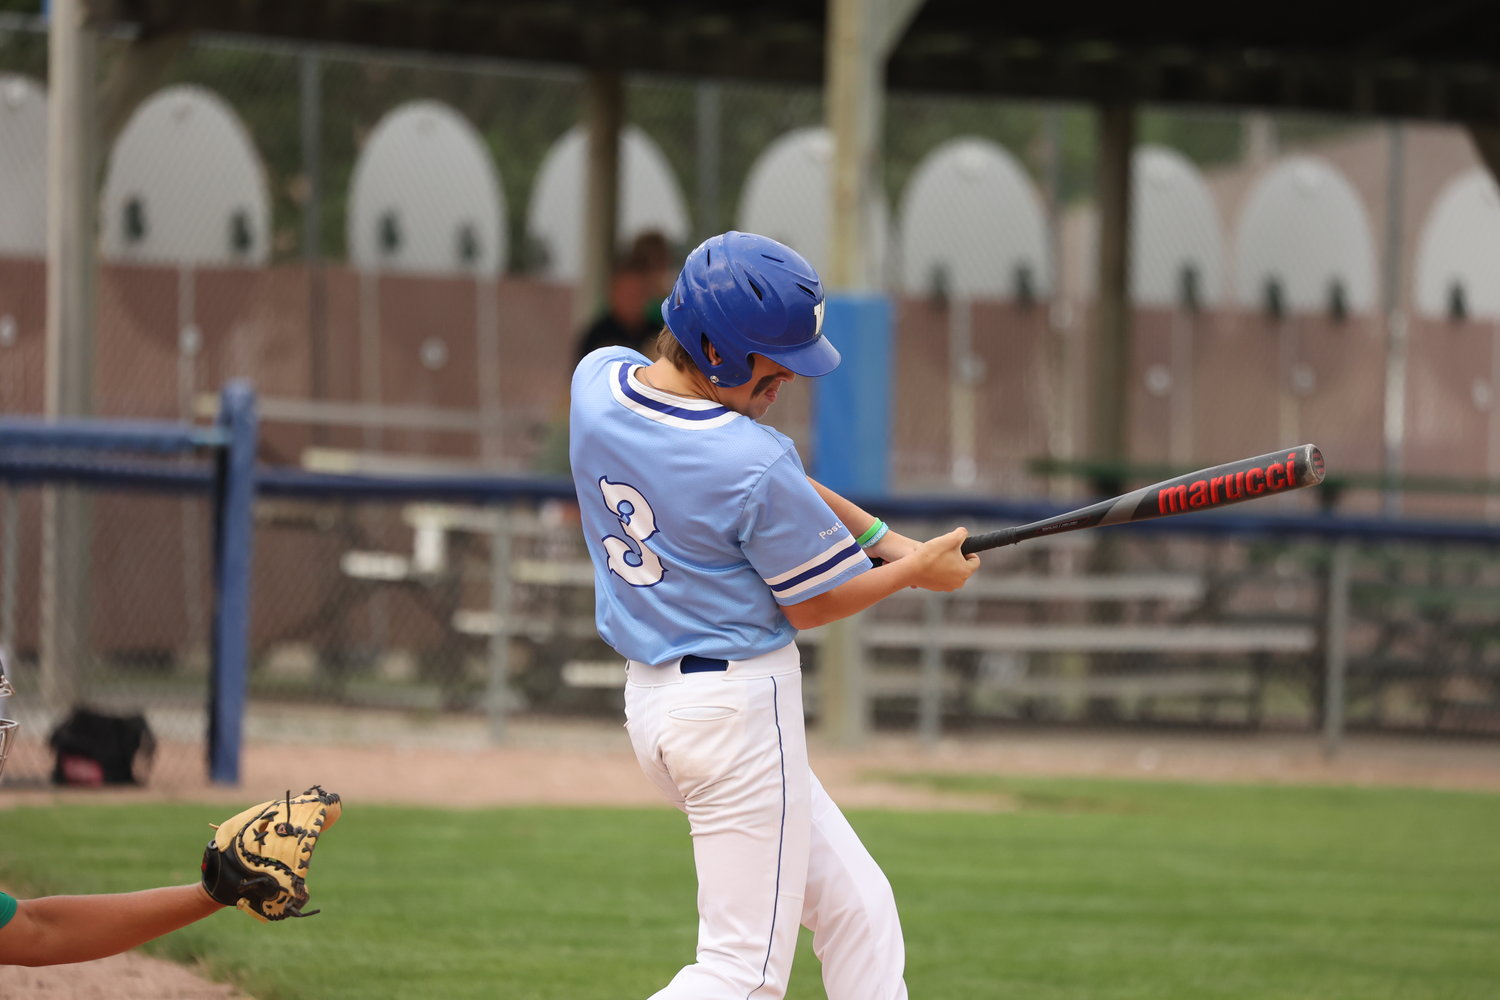 Jase Dean lines a base hit for the Wayne Post 43 Juniors during their final home game of the season last week. The Juniors reached the final four of the B-5 Area tournament in Albion before losing in extra innings to Pierce on Monday night.